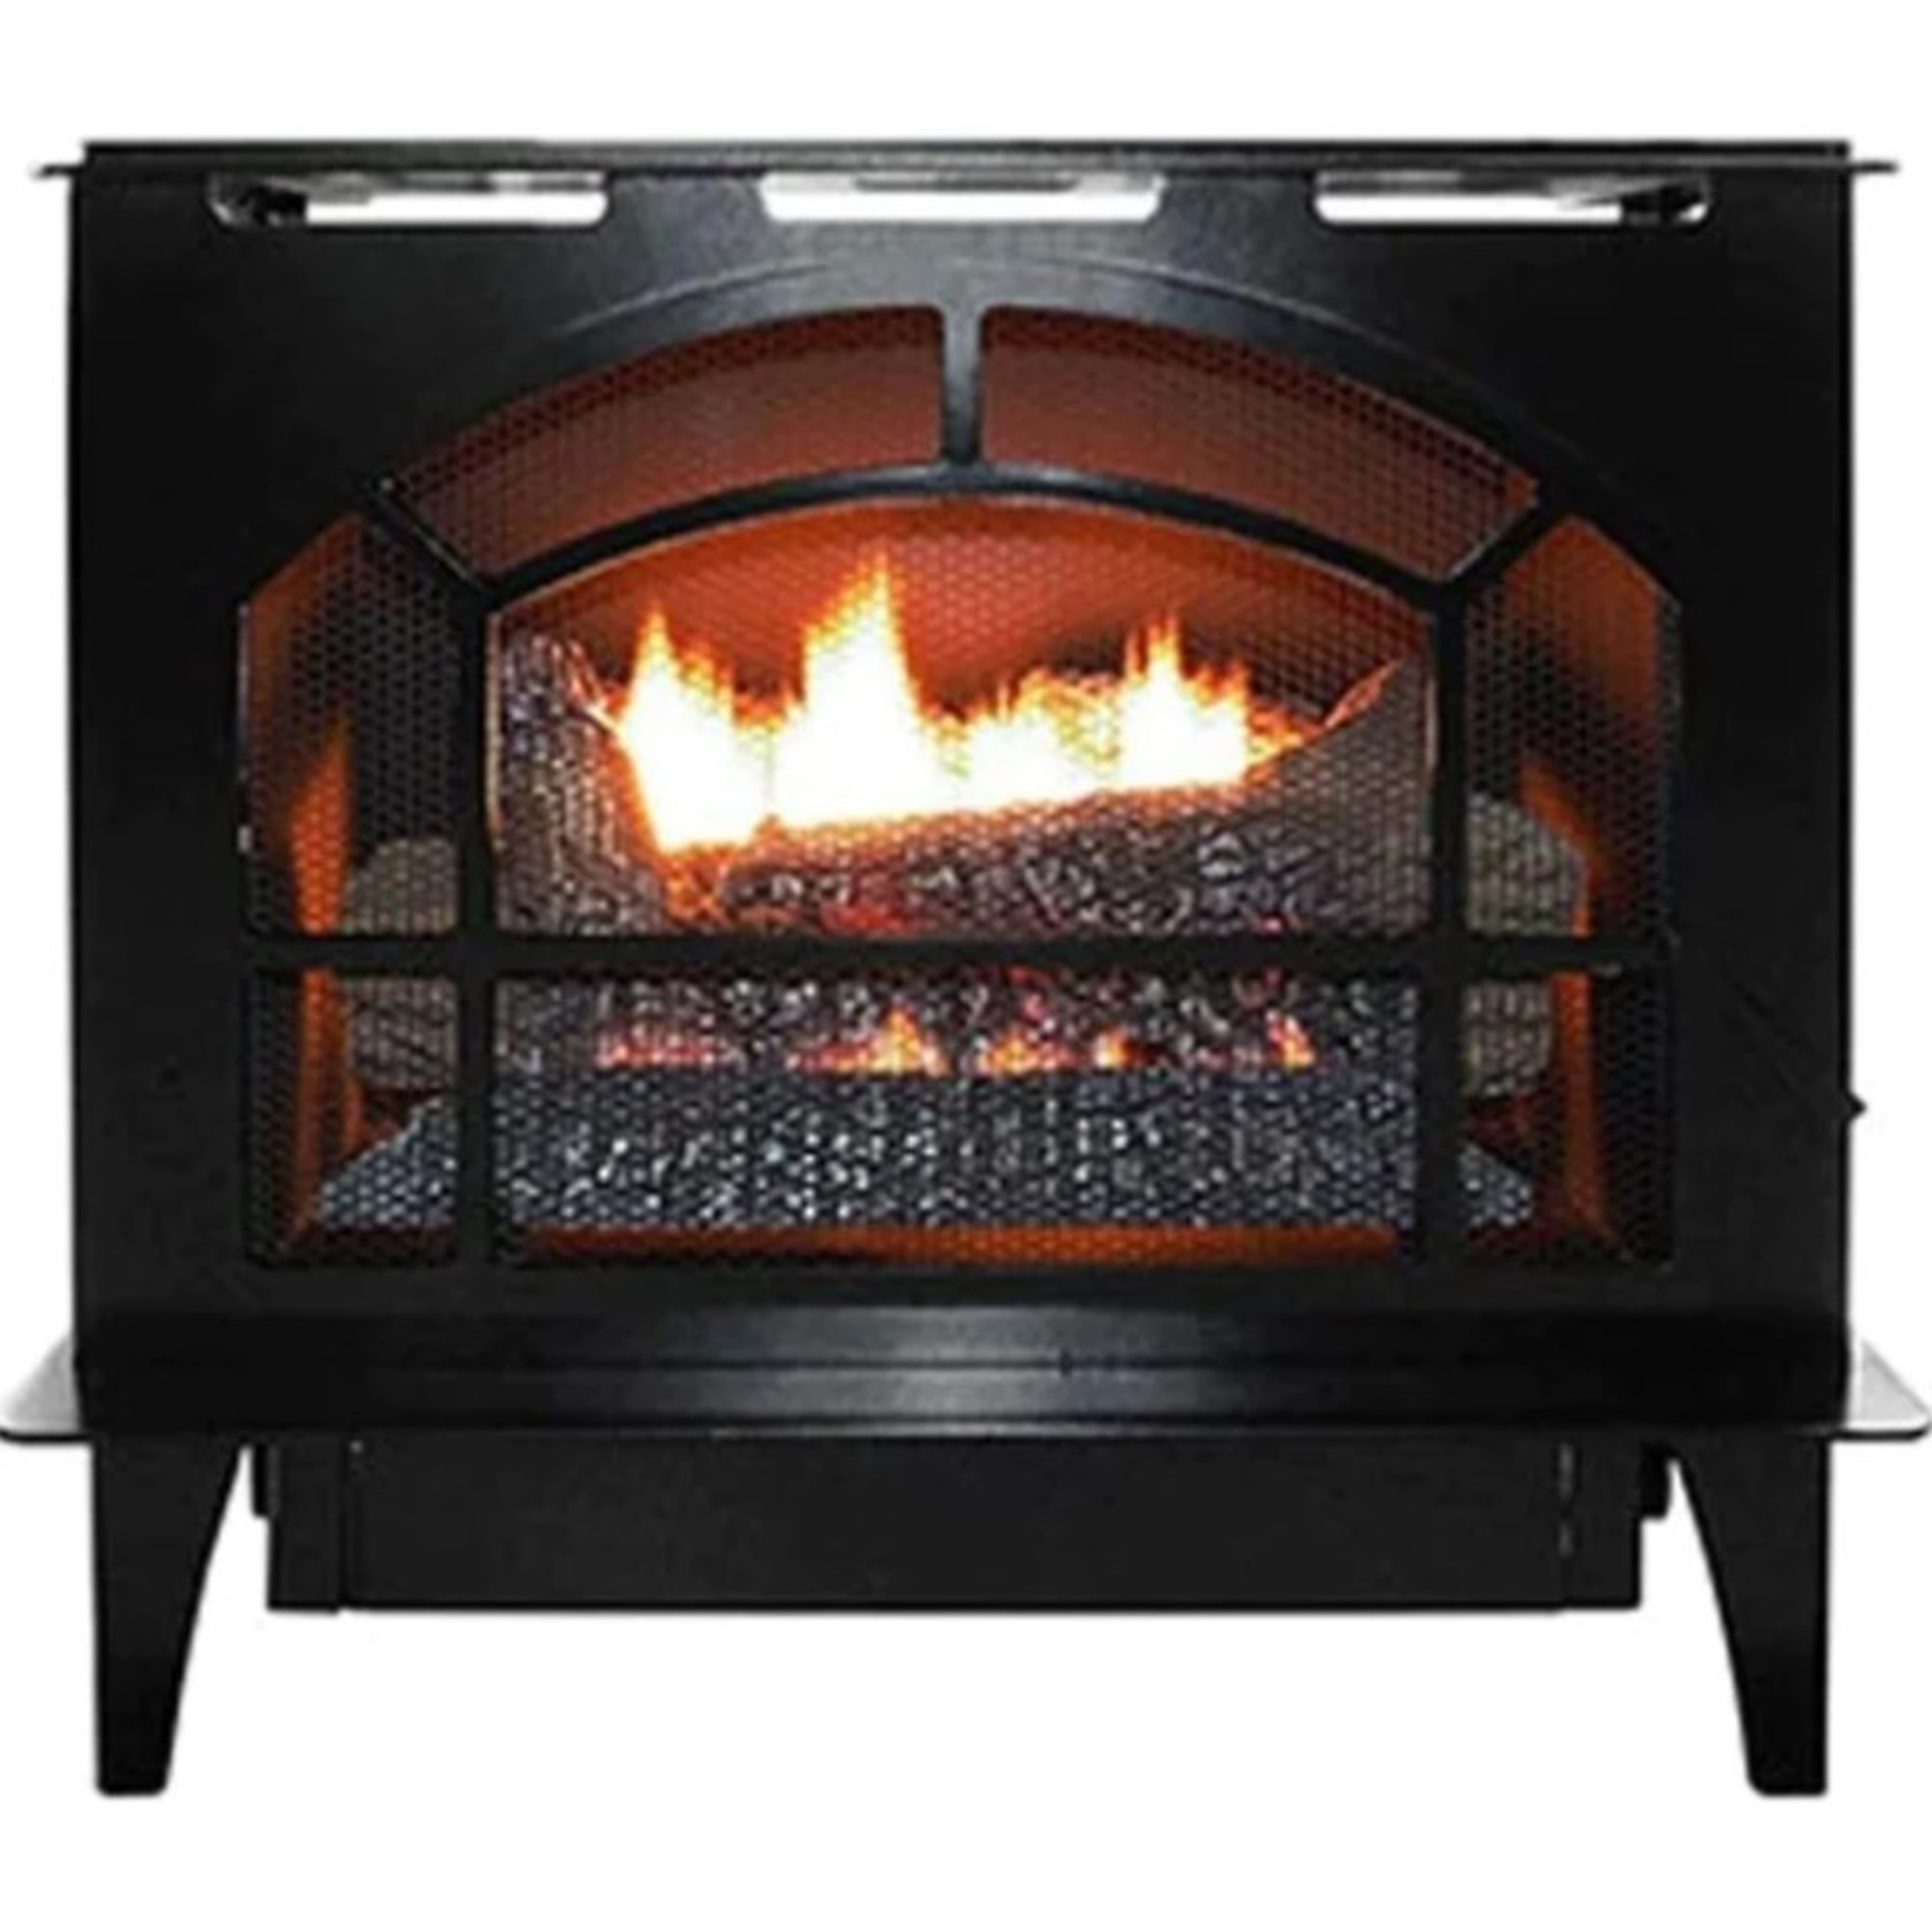 Buck, Vent Free Gas Fireplace, Heat Output 32000 Btu/hour, Heating Capability 1200 ftÂ², Model NV S-TOWNSEND BLK-NG